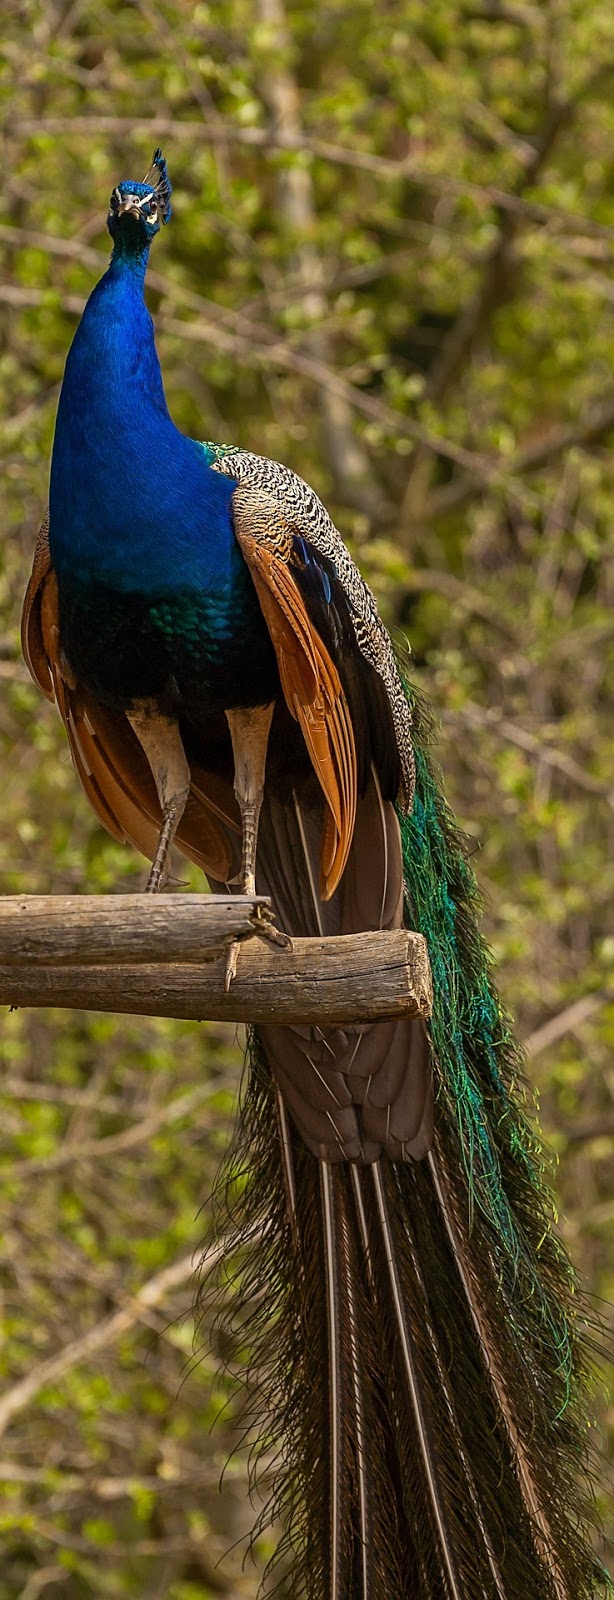 A peacock with it's amazing tail - About Wild Animals